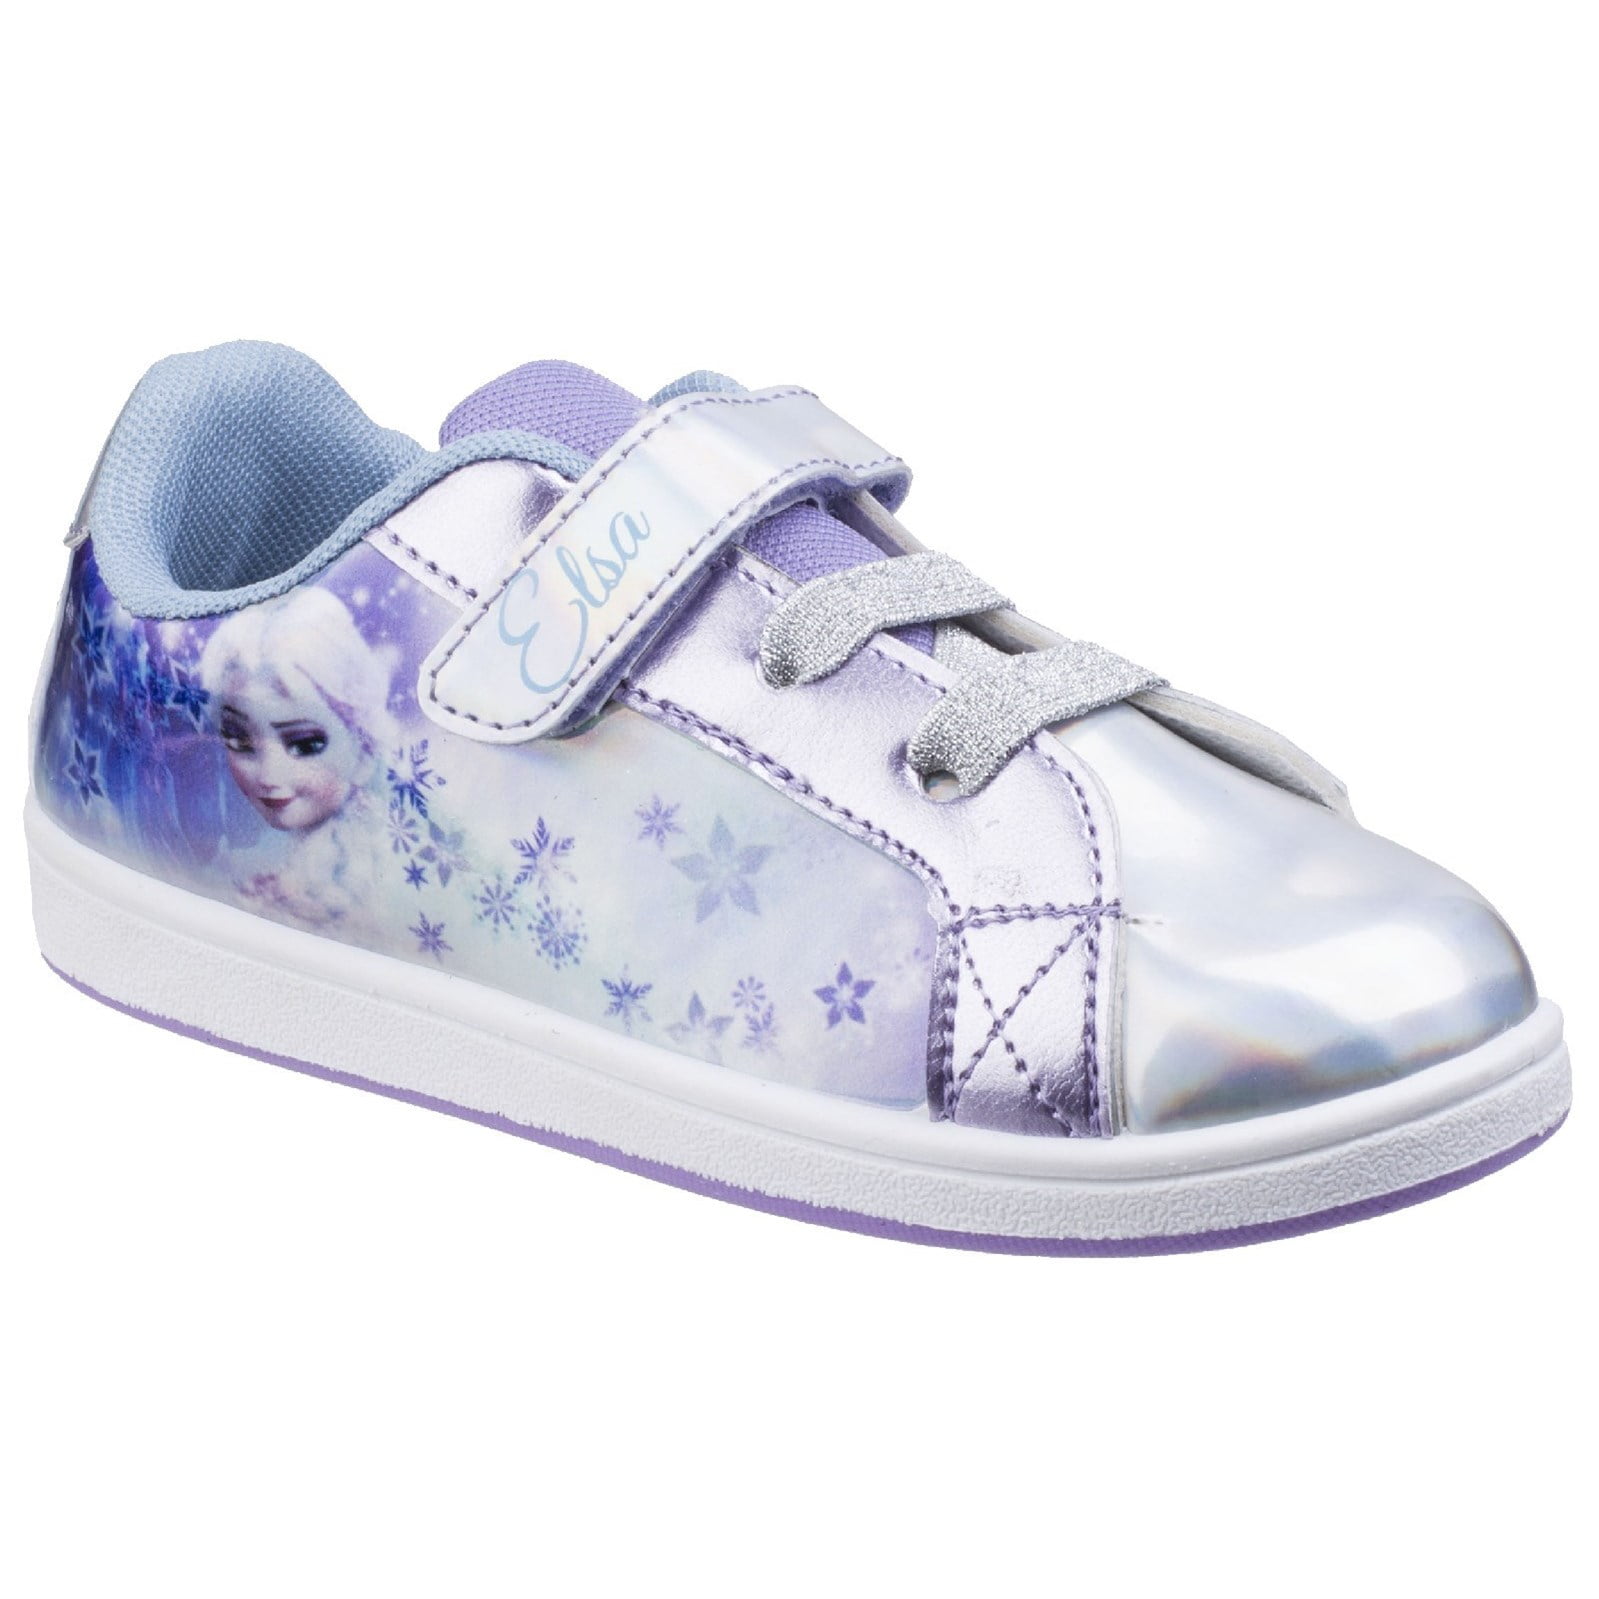 Leomil Girls Paw Patrol Athletic Light Up Sporty Trainers 